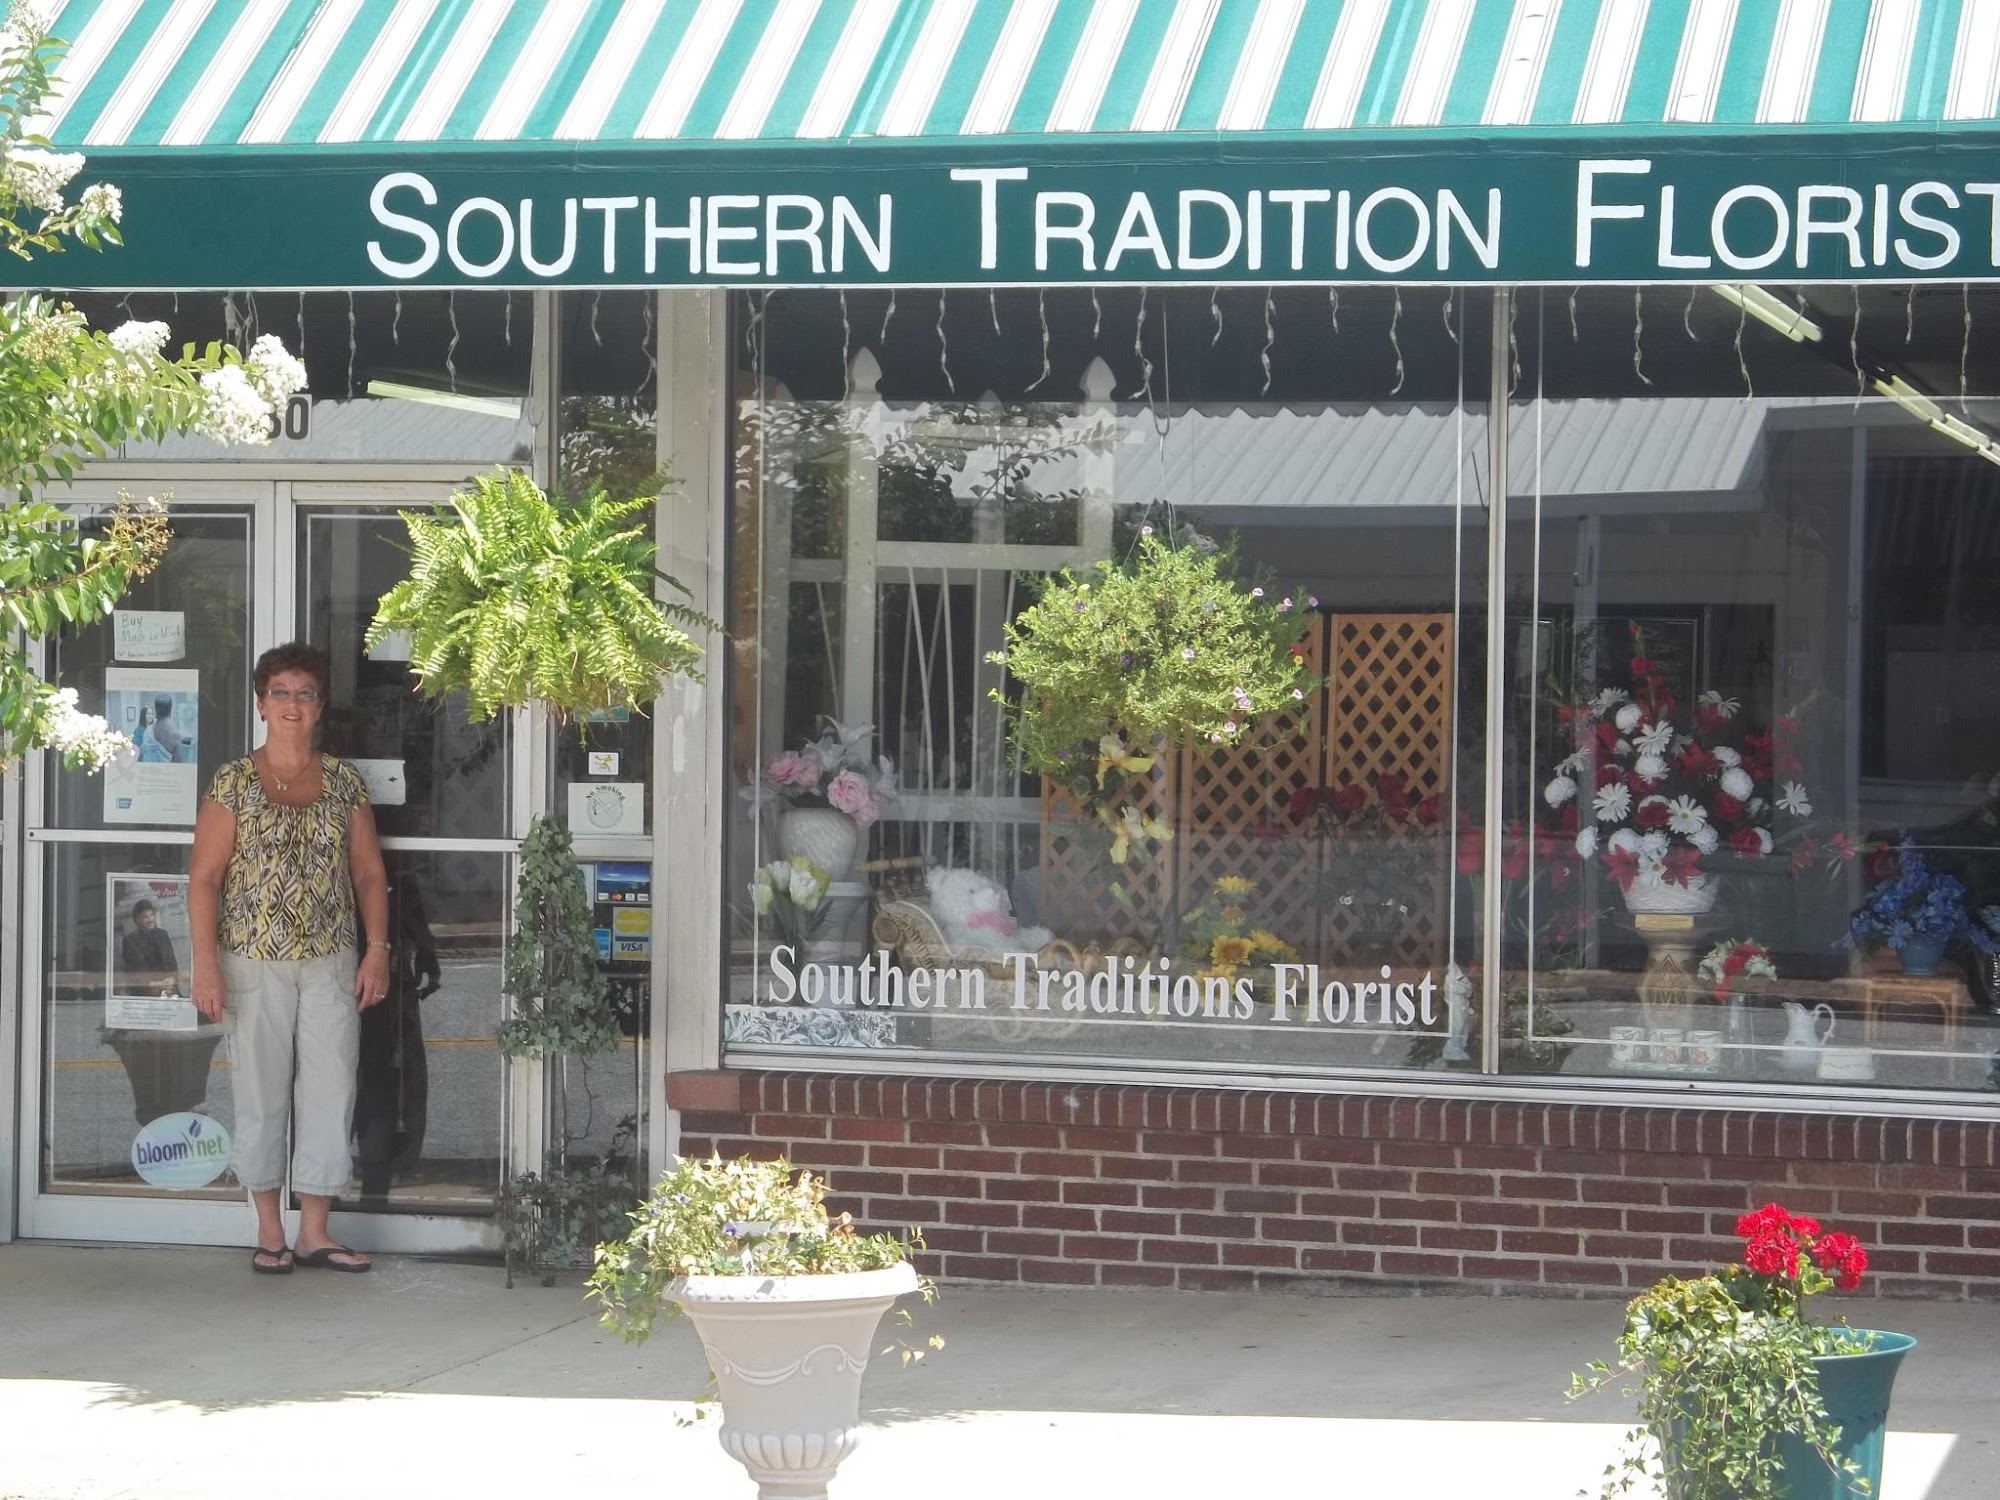 Southern Traditions Florist